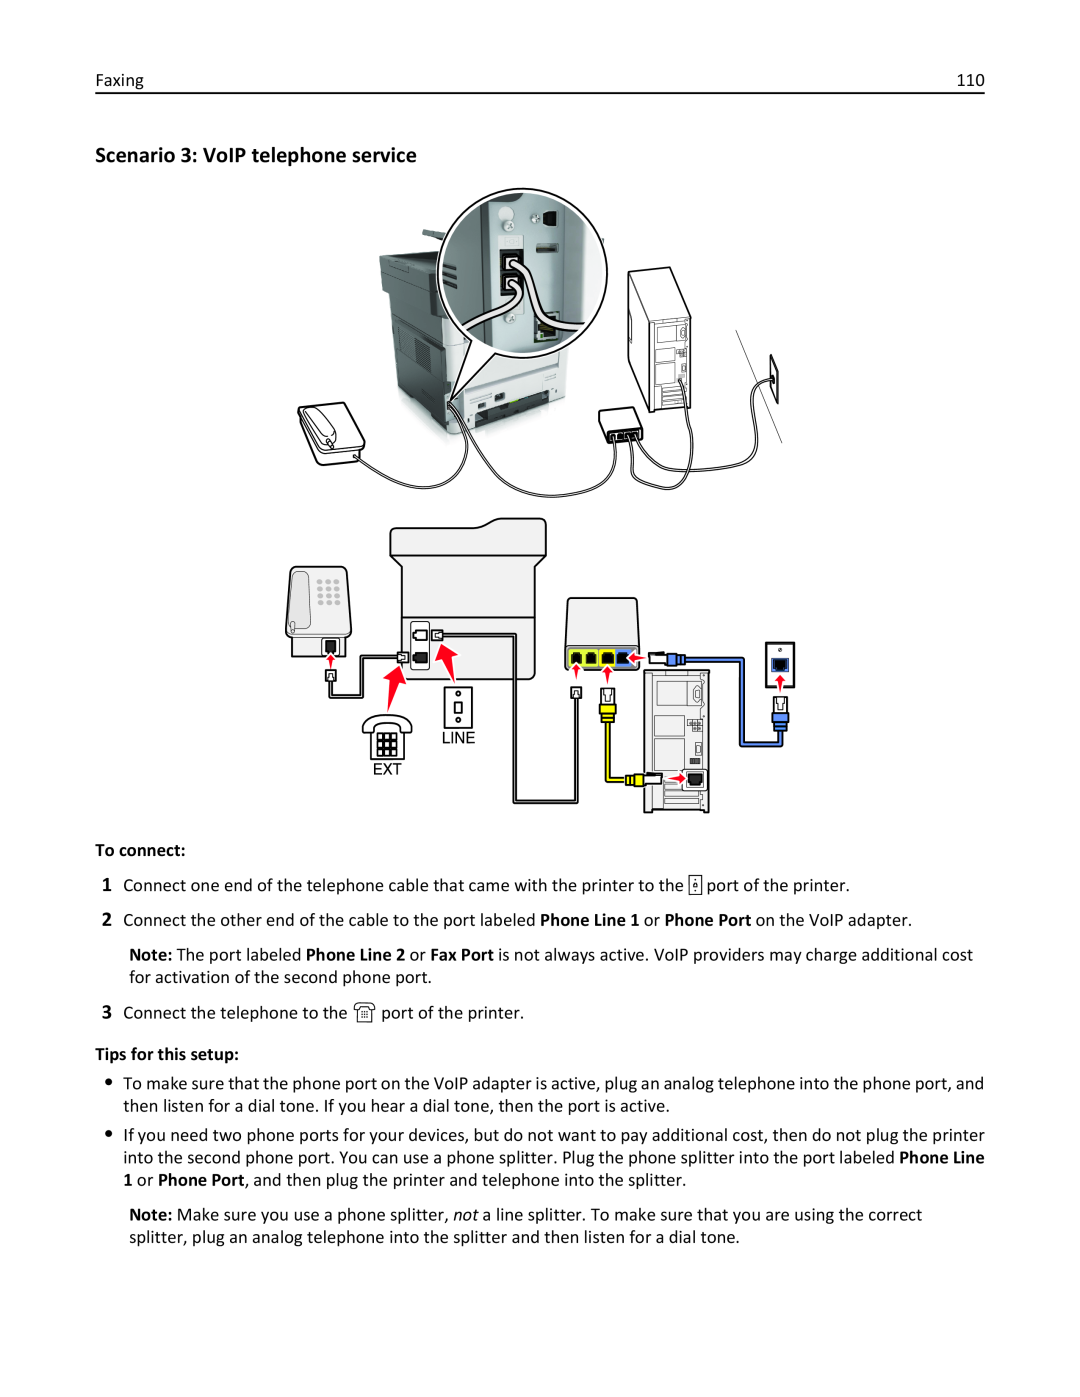 Lexmark 470, 35S5701, 670, 675, MX510, MX410DE manual Scenario 3 VoIP telephone service, To connect, Tips for this setup 